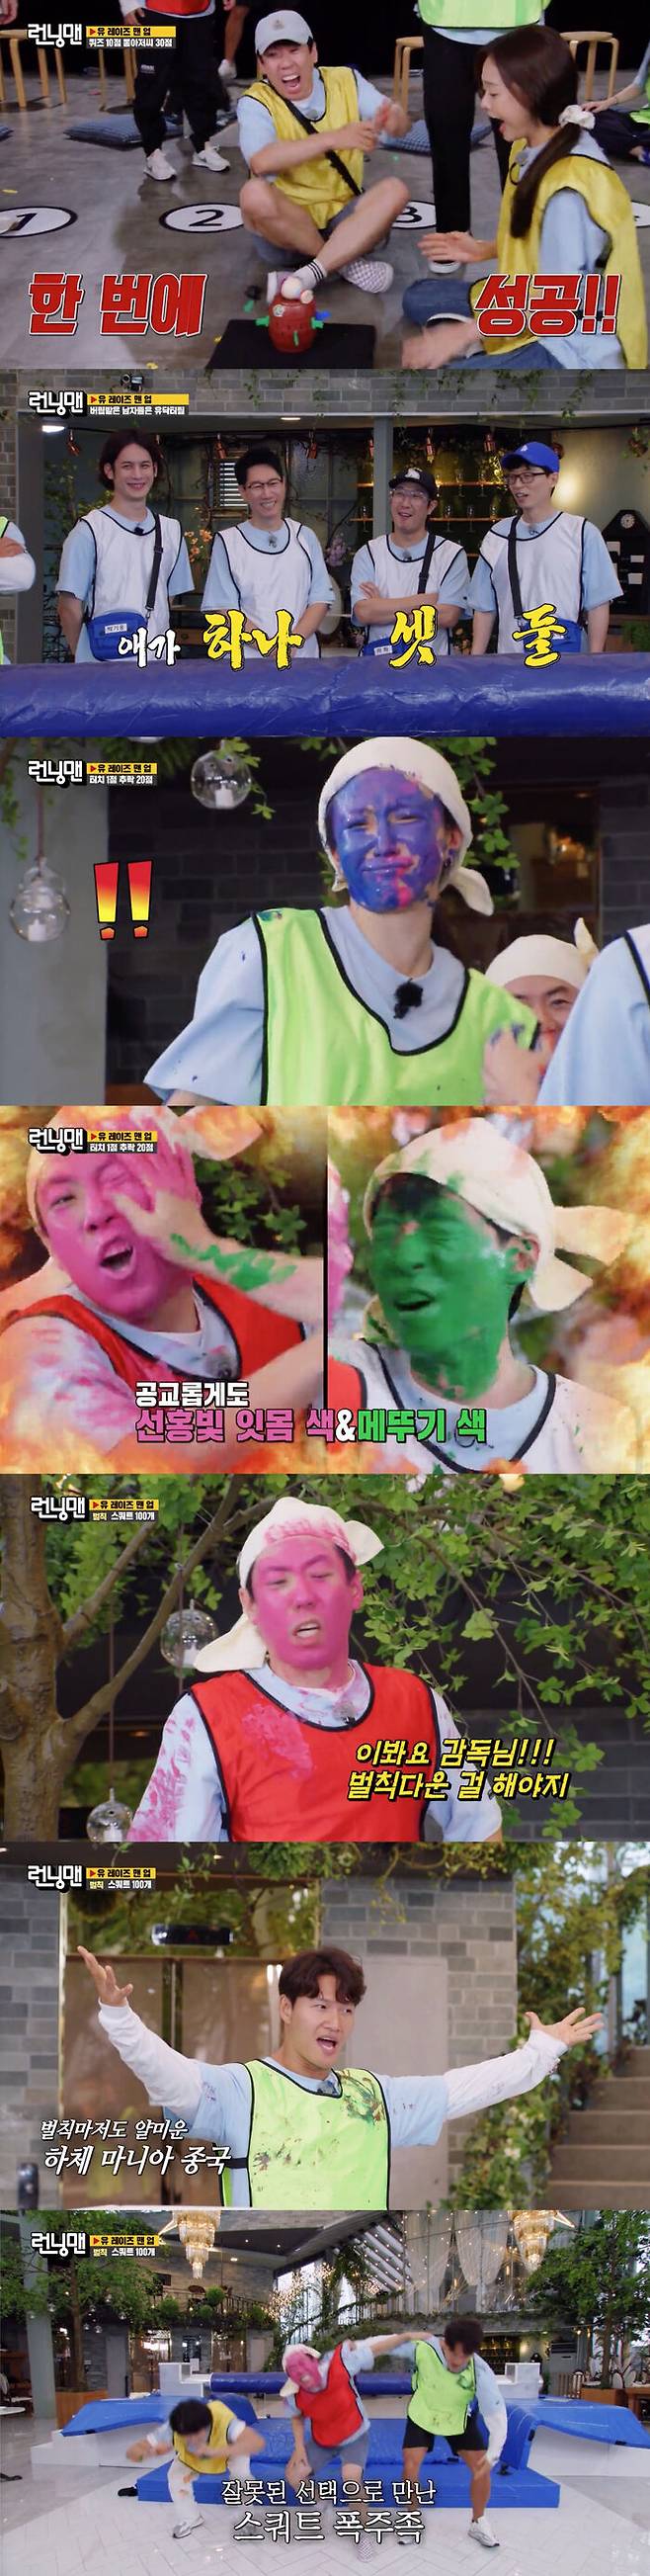 Yang Se-chan has been crowned a squat biker with Kim Jong-kook.On SBS Running Man broadcasted on the 5th, Yu Raise Man Up Race was held.On the day of the broadcast, the members enthusiastically conducted missions to avoid penalties.In the quiz mission ahead of the final mission, Yang Se-chan and Jeon So-min only targeted balloon chances rather than getting the quiz.If you hit the quiz, it is 10 points, but if you succeed in Uncle Tong, it is 30 points.Yang Se-chan and Jeon So-min sought only balloons in search of a real knife that would make Uncle Tong jump up, and their strategy was right.It was a similar score to other teams without any quizzes.With the gangsters propaganda continuing, Yang Se-chan was excited to meet the problem he knew.However, Jeon So-min did not know the answer, and eventually he gave the answer to another team.The last mission was to fencing the hand of the one-legged hand; four men with low self-esteem led by Dr. Yu became one team and the other six teamed up.Yoo Jae-Suk, Haha, and Ji Suk-jin, who were caught in a low self-esteem man, showed an unpleasant sign: They do not know a real man.The child is one to three, he boasted of their masculinity and laughed.Haha faced Hani, who, without a single look, painted his face on the front, gifting him a fine job.The final showdown was Kim Jong-kook and Park Ki-woong.Park Ki-woong, who was touched by Kim Jong-kook in an instant, was puzzled, saying, I think I lost my memory for about two seconds.The same team members recommended that they abandon the idea of hitting one and blow themselves up, but Park Ki-woong burned his will, saying, I will hit one Taiwan.But his wind ended quickly with a co-death.Yang Se-chan and Yoon Shi-yoon were confirmed as penalties according to the final score results.The two of them selected one person to be punished together as Kim Jong-kook.And the production team said, Todays three penalties are 100 Squats that can upload Hatje Cantz Verlag muscle, and Kim Jong-kook called for pleasure.Other members who saw it were embarrassed, Is that a penalty? Finally, I like this too much, but what penalty is it?Prior to the penalty, Kim Jong-kook told two people, Man is Hatje Cantz Verlag, and Do not do it too quickly and feel it.Lets make it ours, not throw away what we do. Lets make 100 of us.And he checked the restraint of the two throughout the penalty, and Yang Se-chan, who could not keep up with the speed, forced him to hold on and proceeded to the squat at a terrible speed.After the penalty, Yang Se-chan fell down on the spot, and Yoon Shi-yoon told Kim Jong-kook that he was a glory.Kim Jong-kook also laughed at the penalty every time he said he would like it.